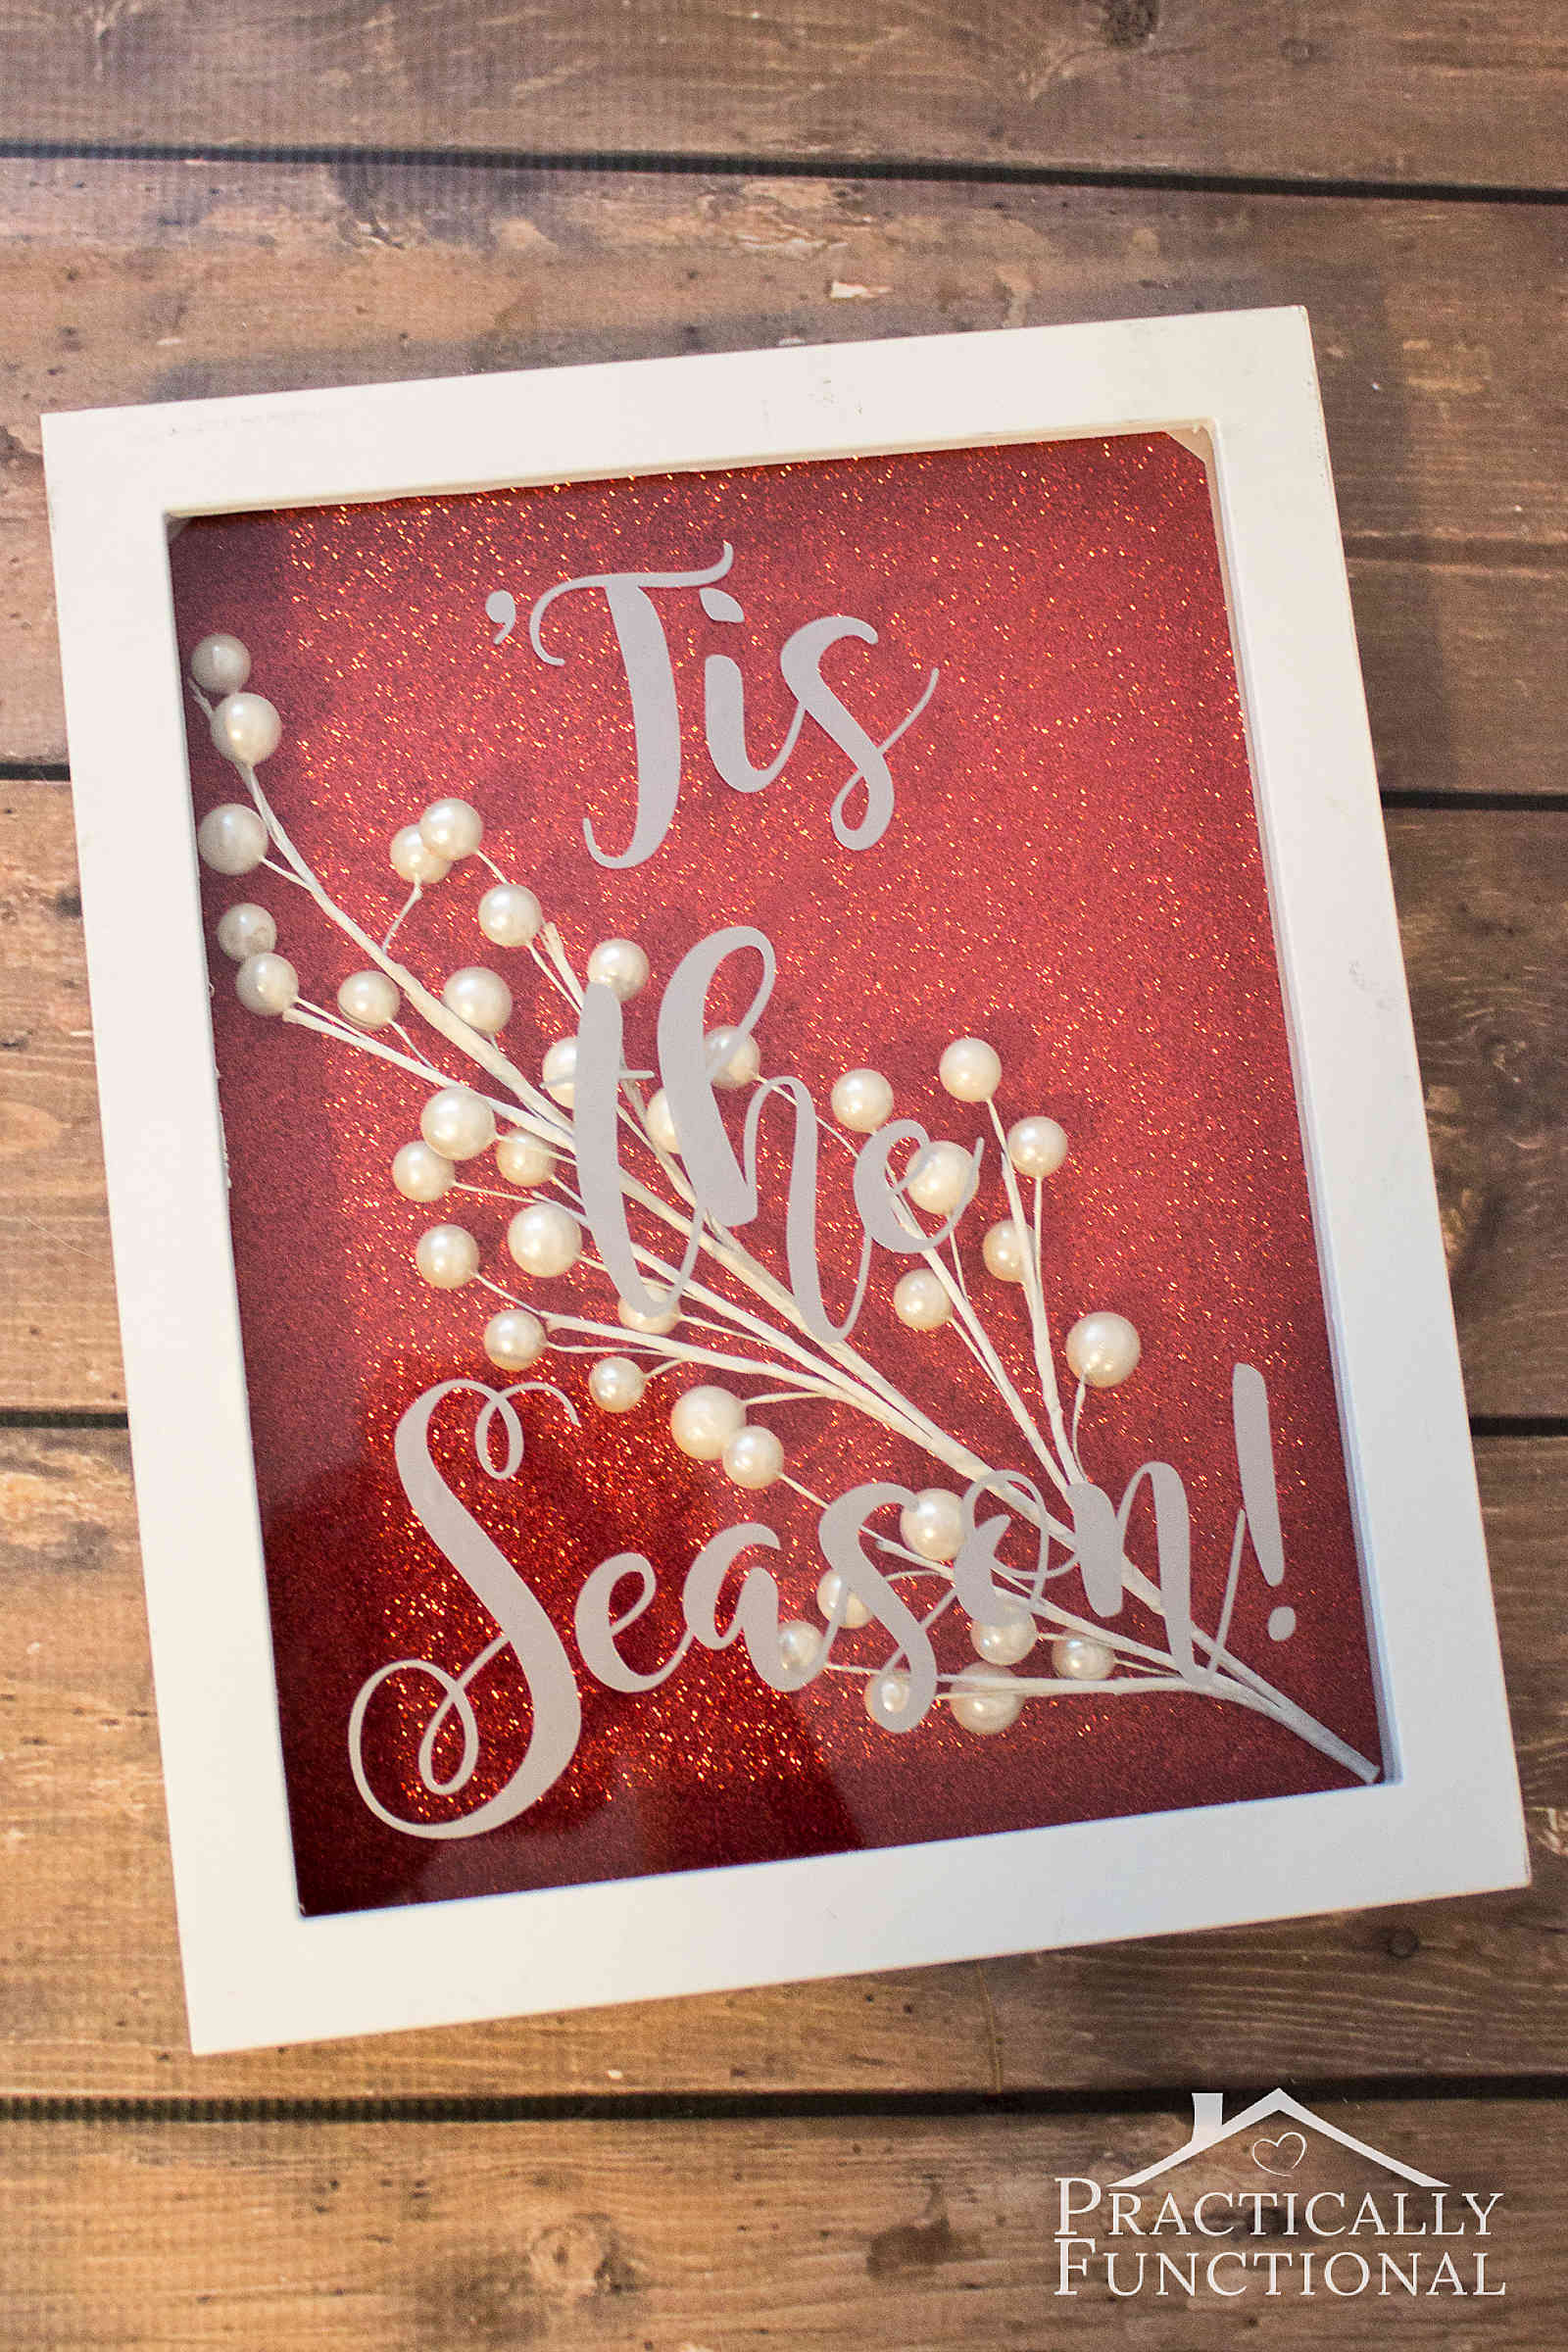 Gorgeous DIY 'Tis the season shadowbox! Great tutorial on how to customize your own shadowbox in under 15 minutes!